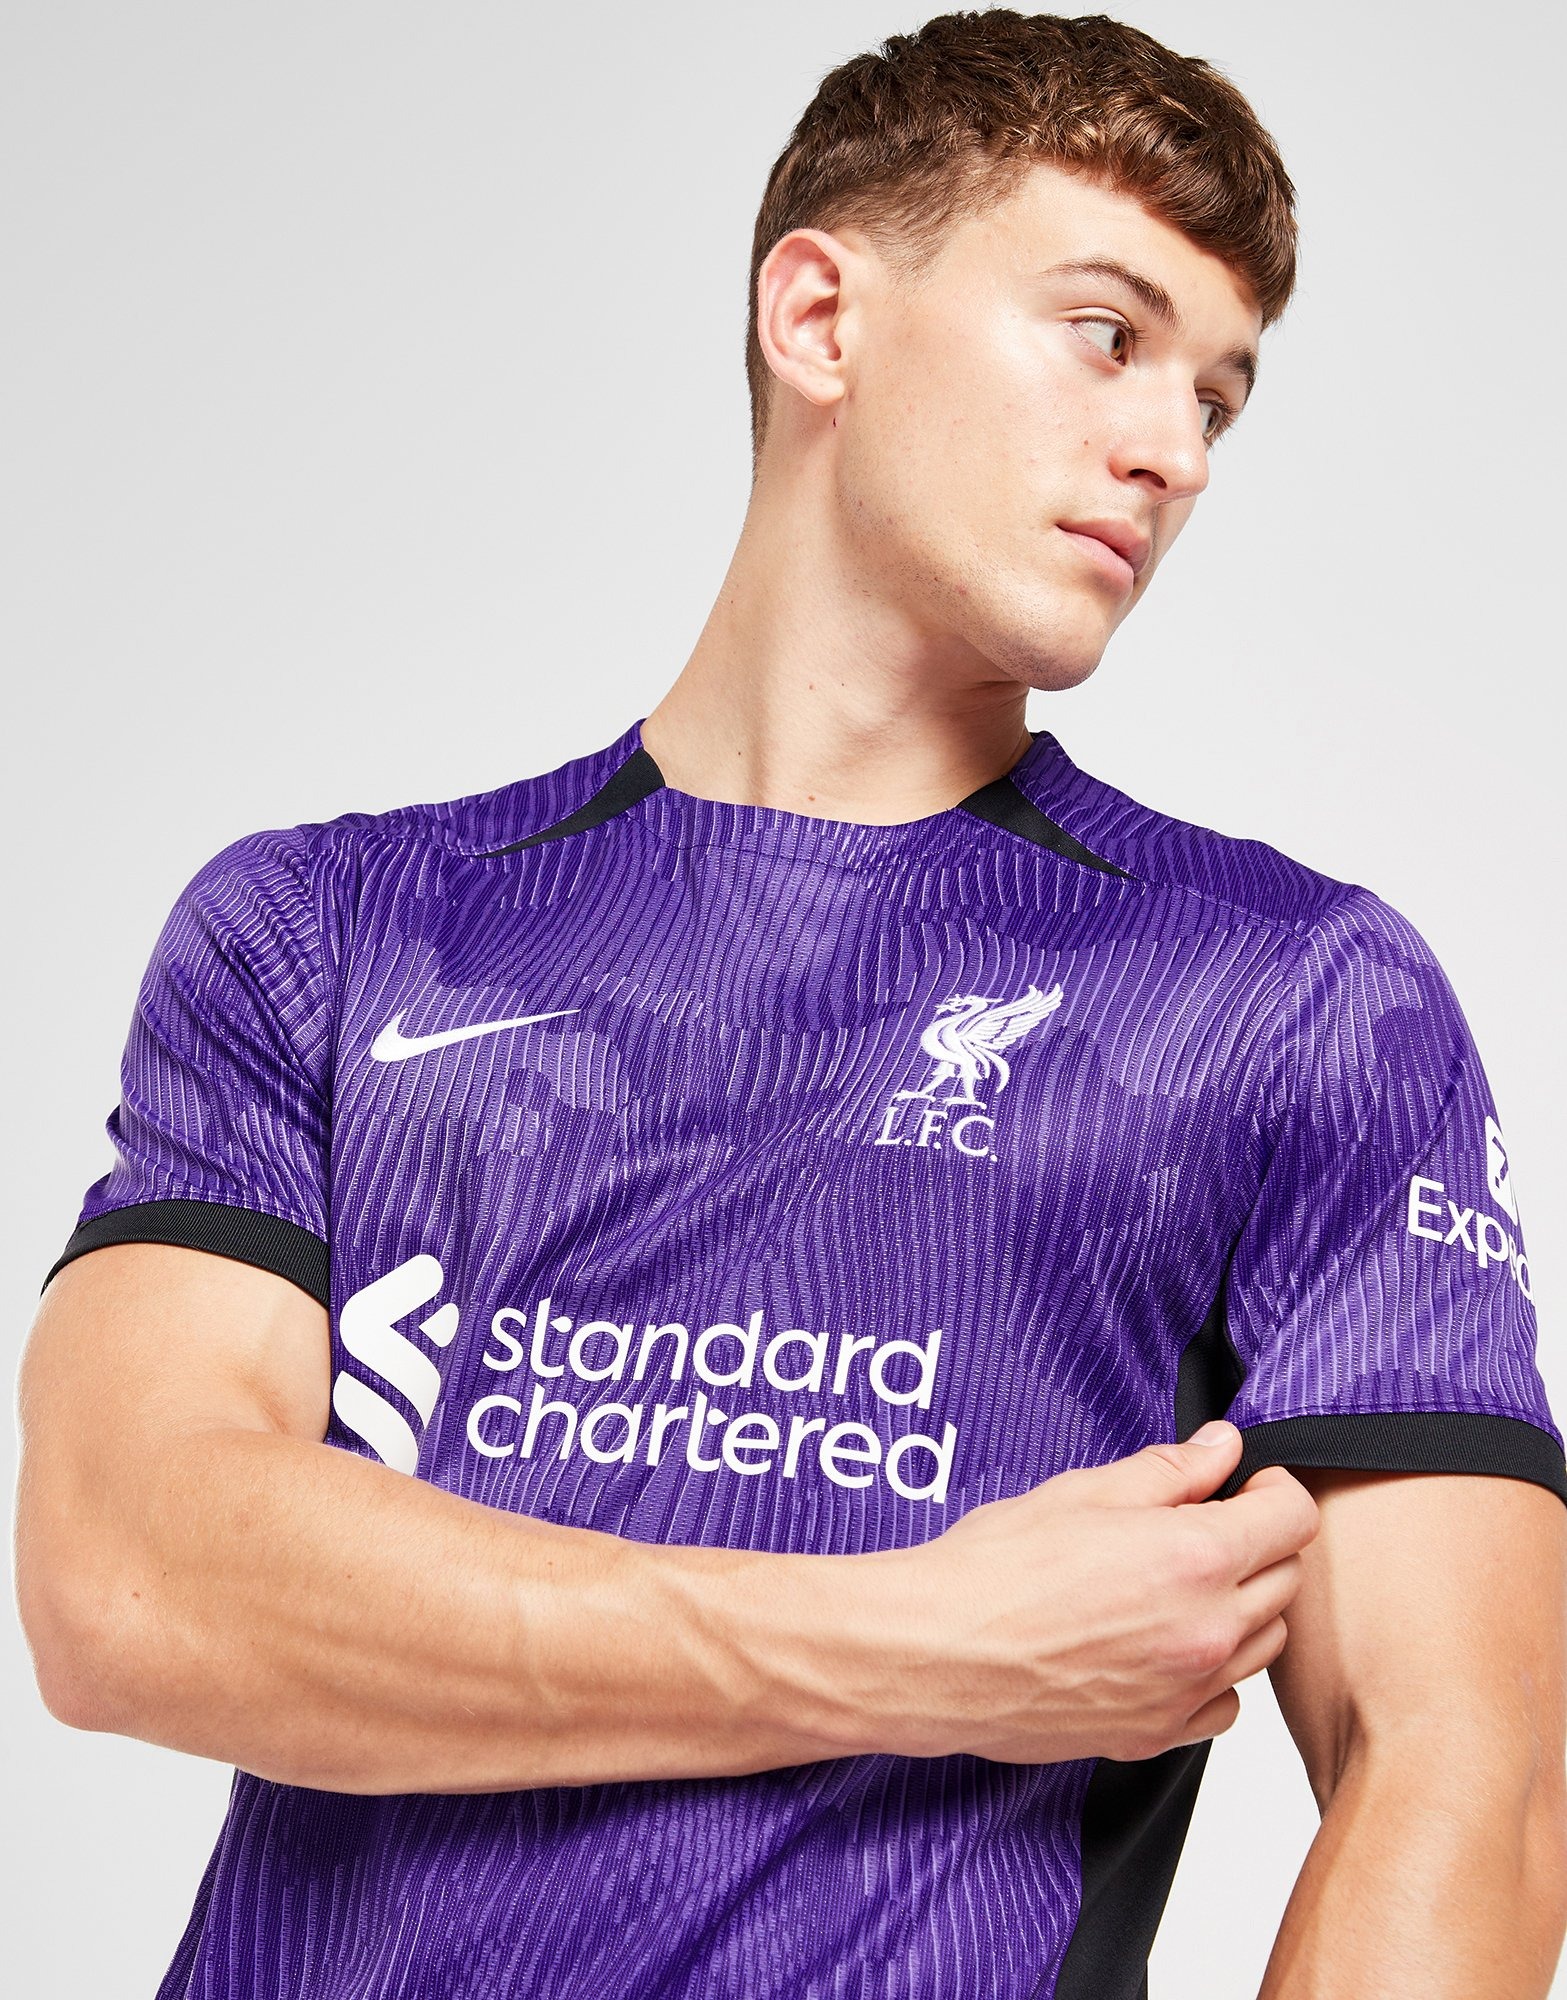 Update: This is How Liverpool's Nike 24-25 Home Kit Could Look